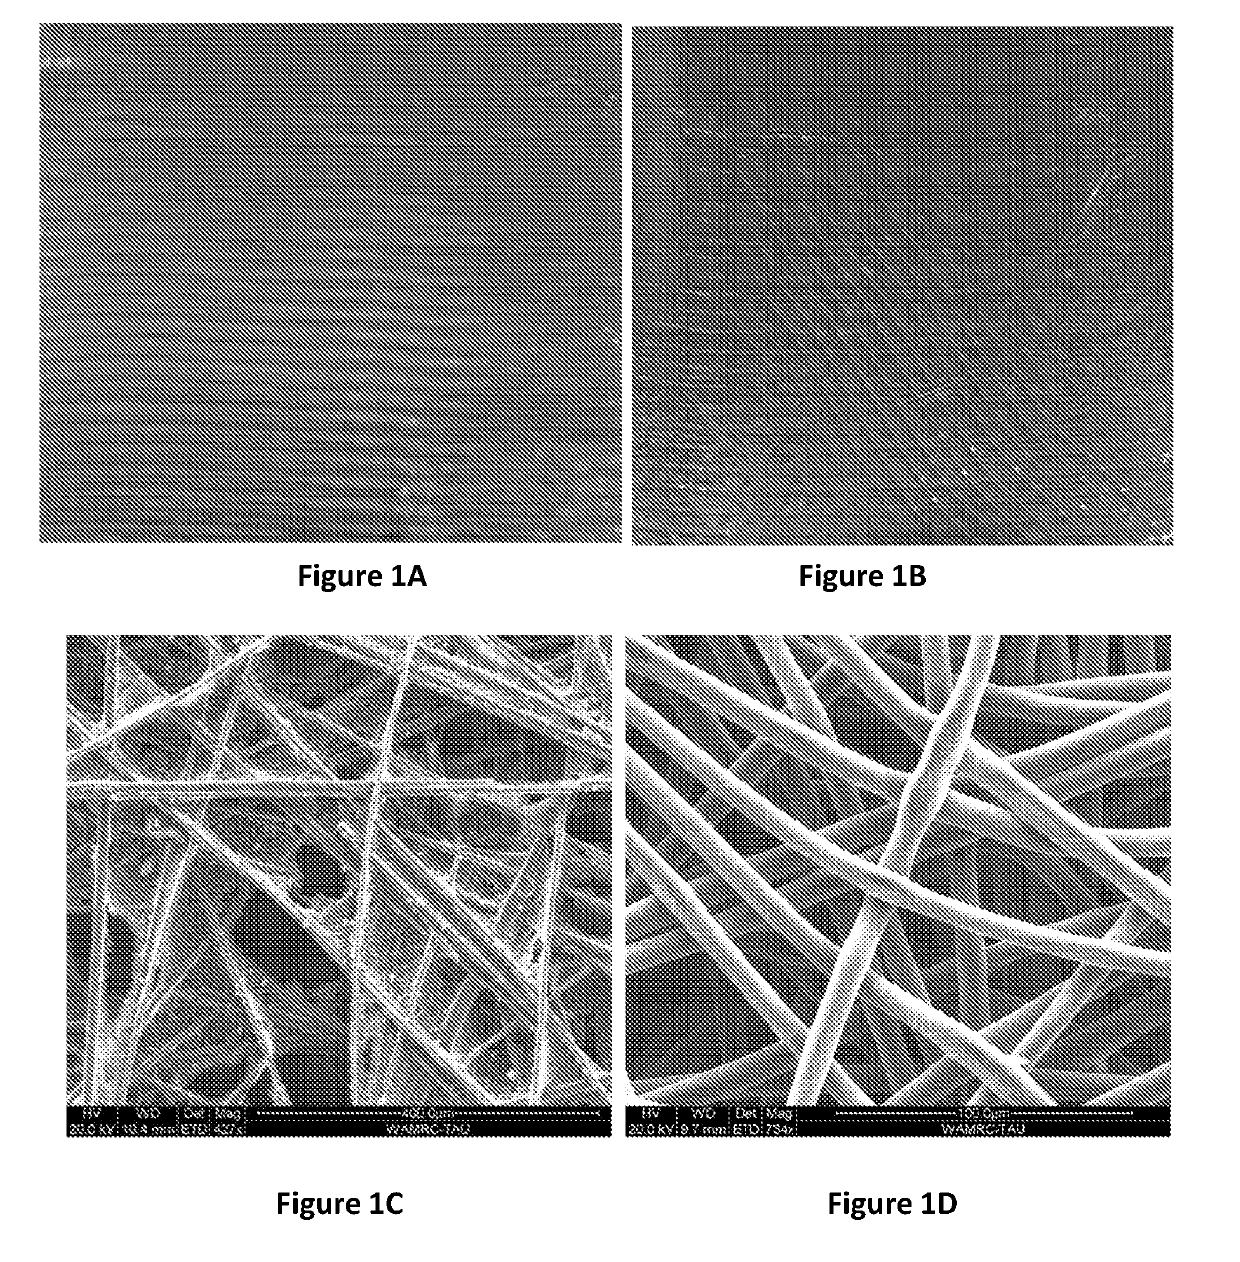 High-capacity silicon nanowire based anode for lithium-ion batteries